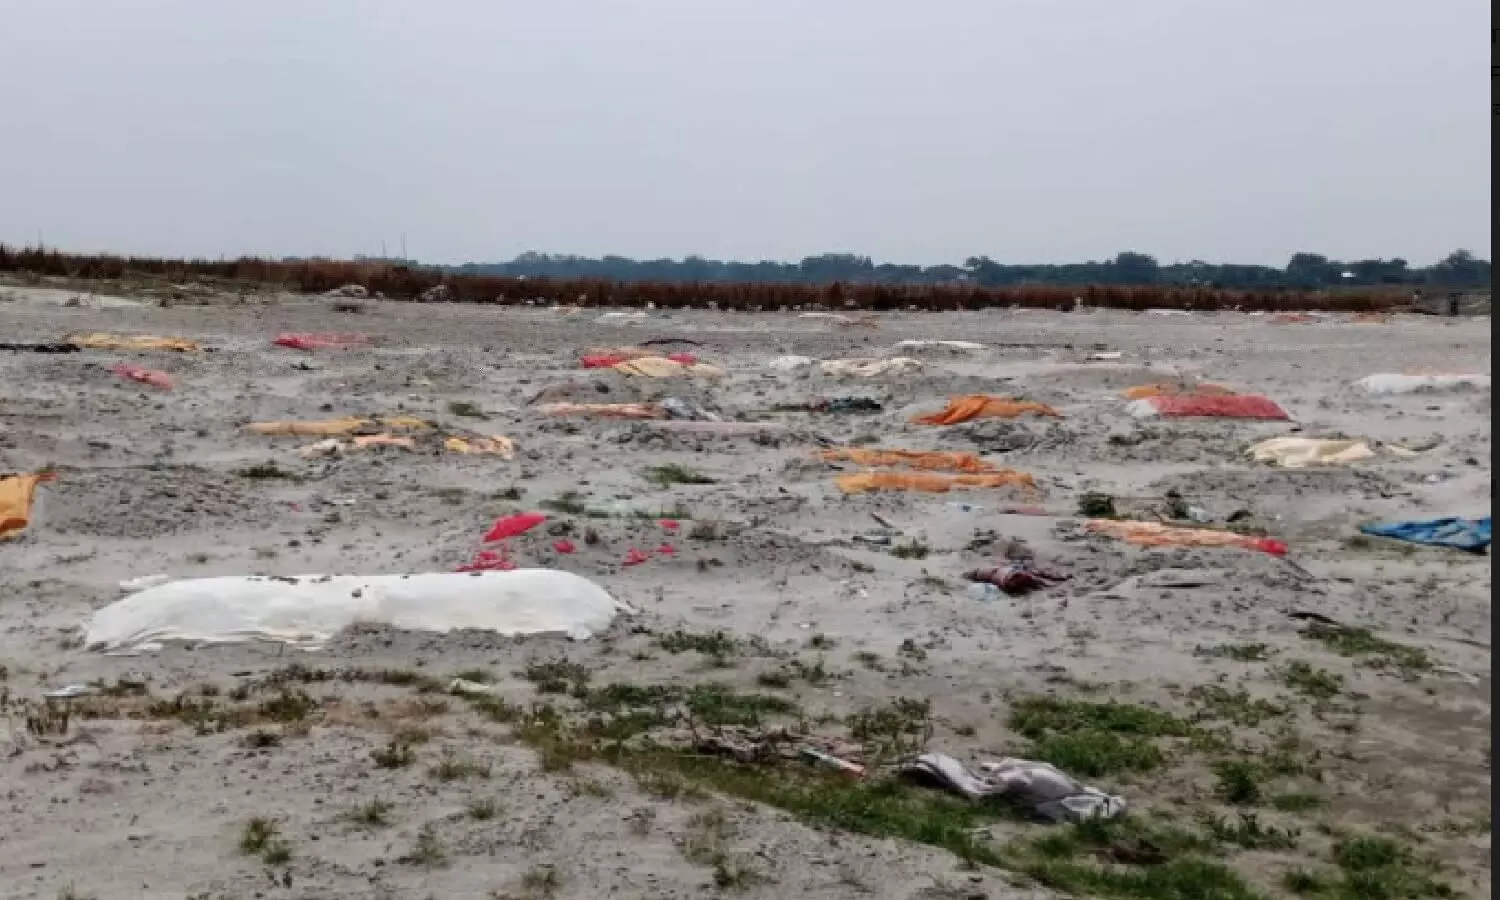 Ganga Ghat of Rae Bareli. Hundreds of bodies are being buried above the sands of the Ganges river.